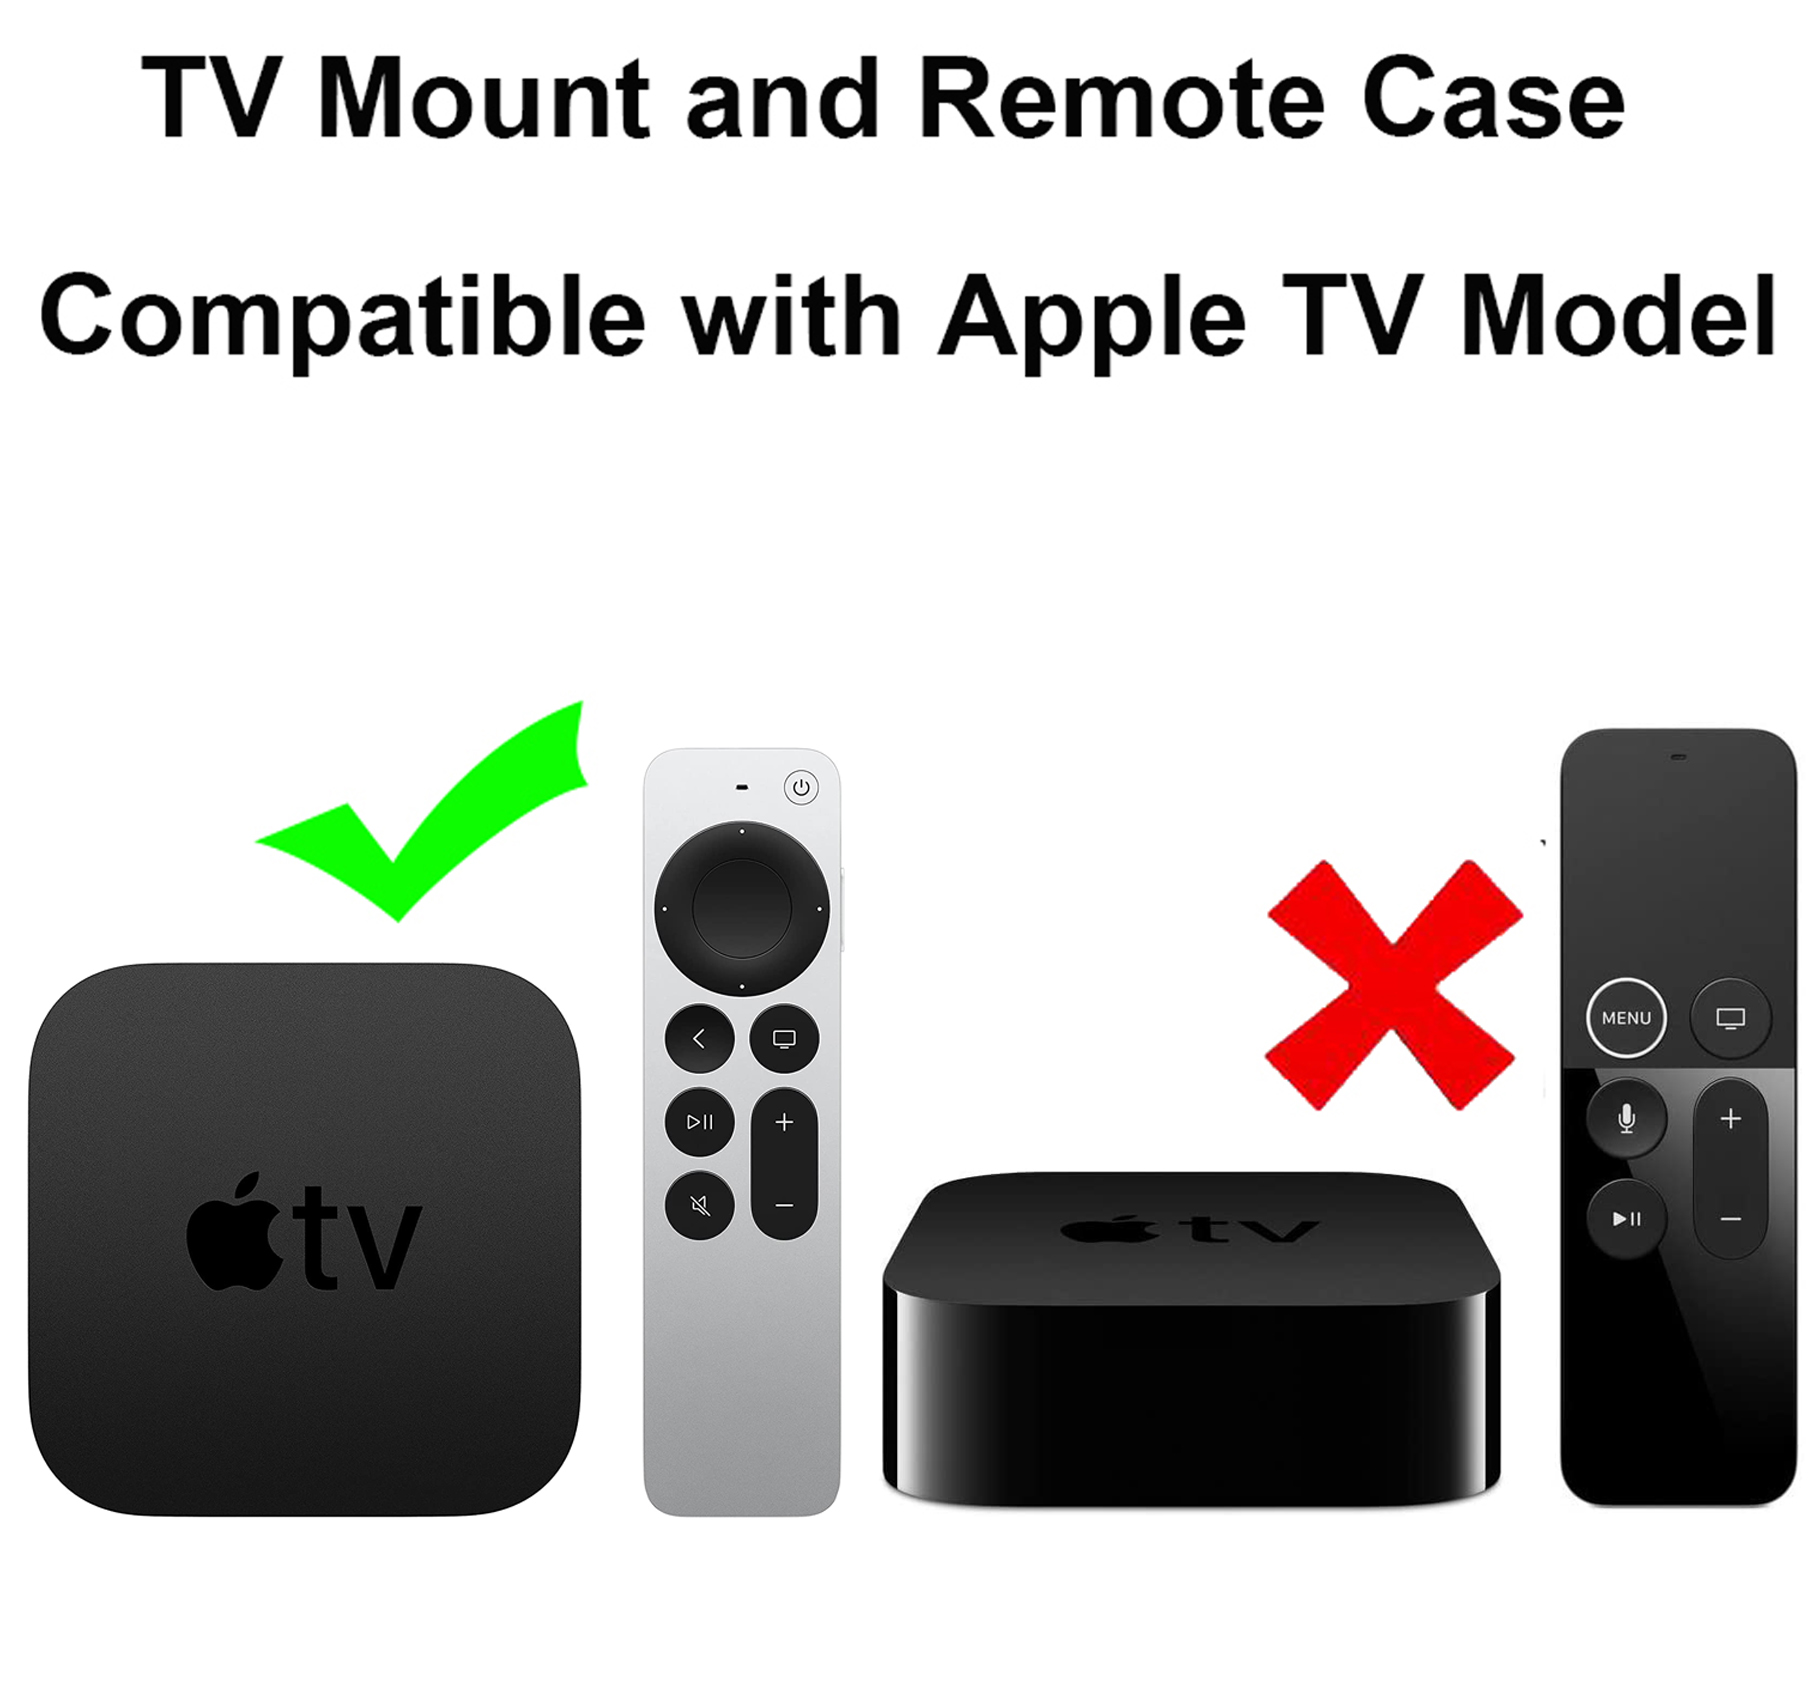 TOKERSE TV Wall Mount Bracket Holder for Apple TV 4K (2nd 2021 & 1st Gen) and Apple TV HD - Silicone Remote Case Cover Fits for Apple TV 4K Siri Remote (2nd Generation) and HD 5th Generation - Black